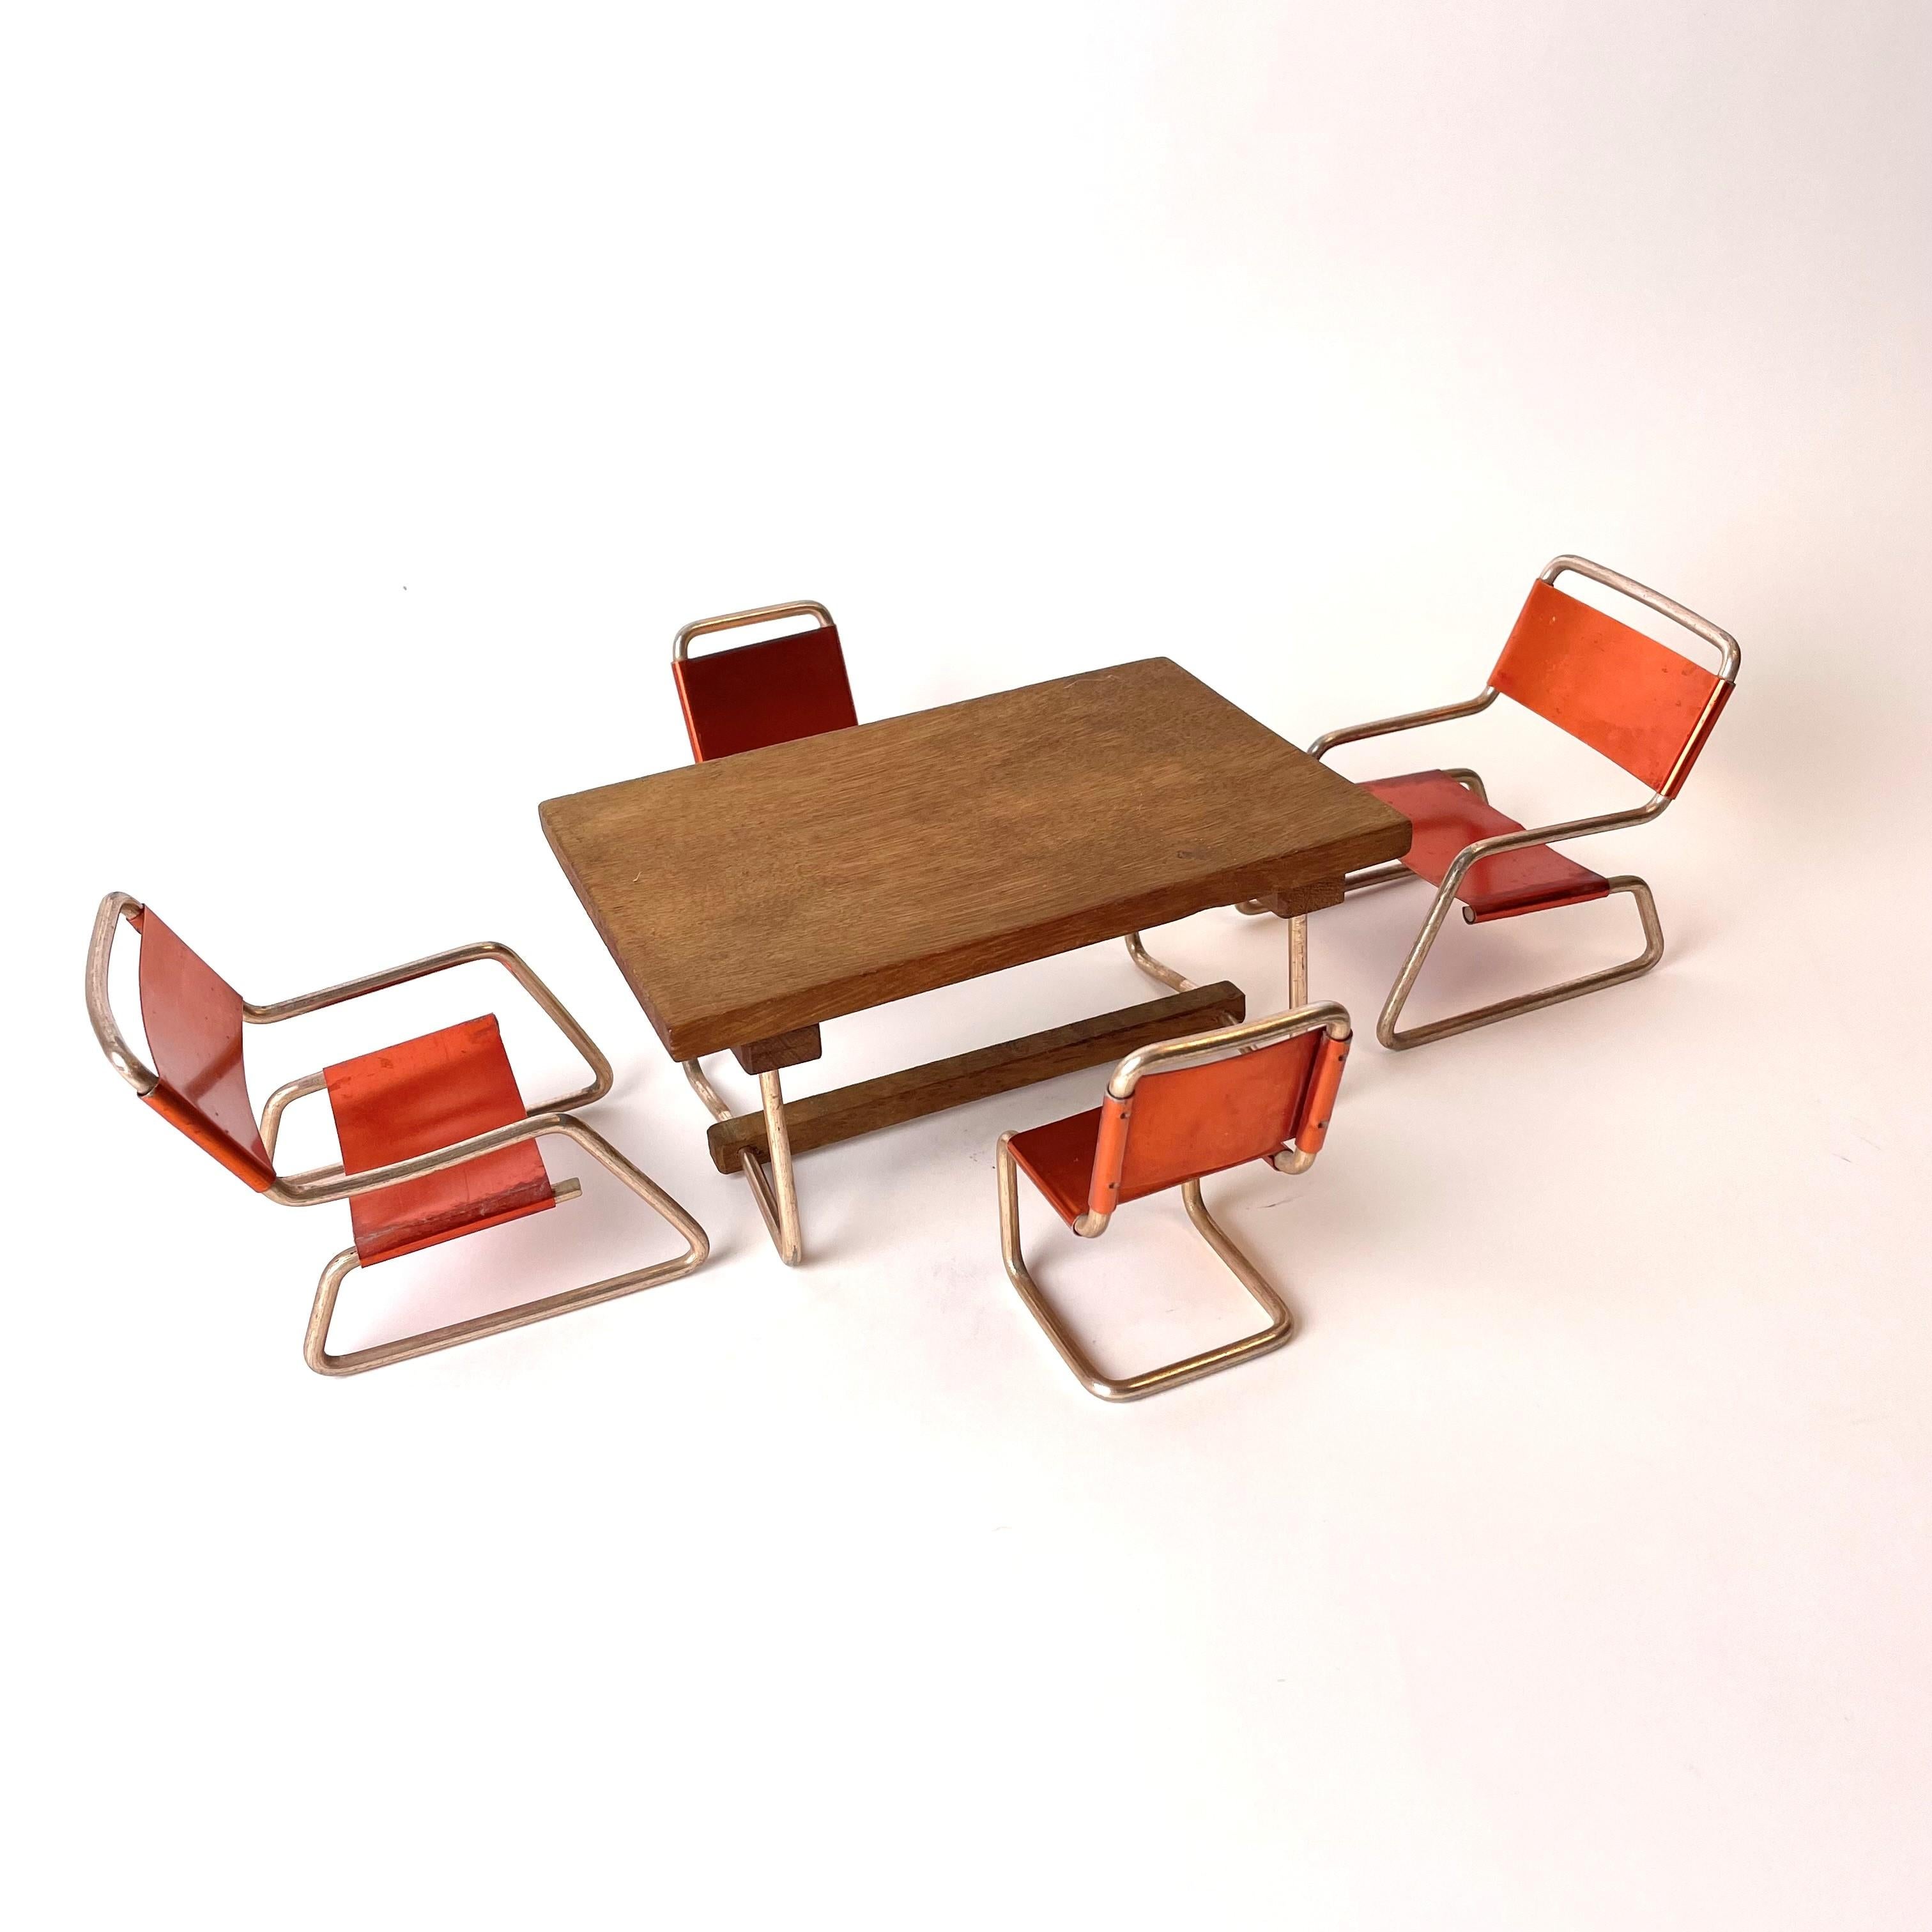 European Charming Miniature Seating Group in Bauhaus Style from the 1930s-1940s For Sale